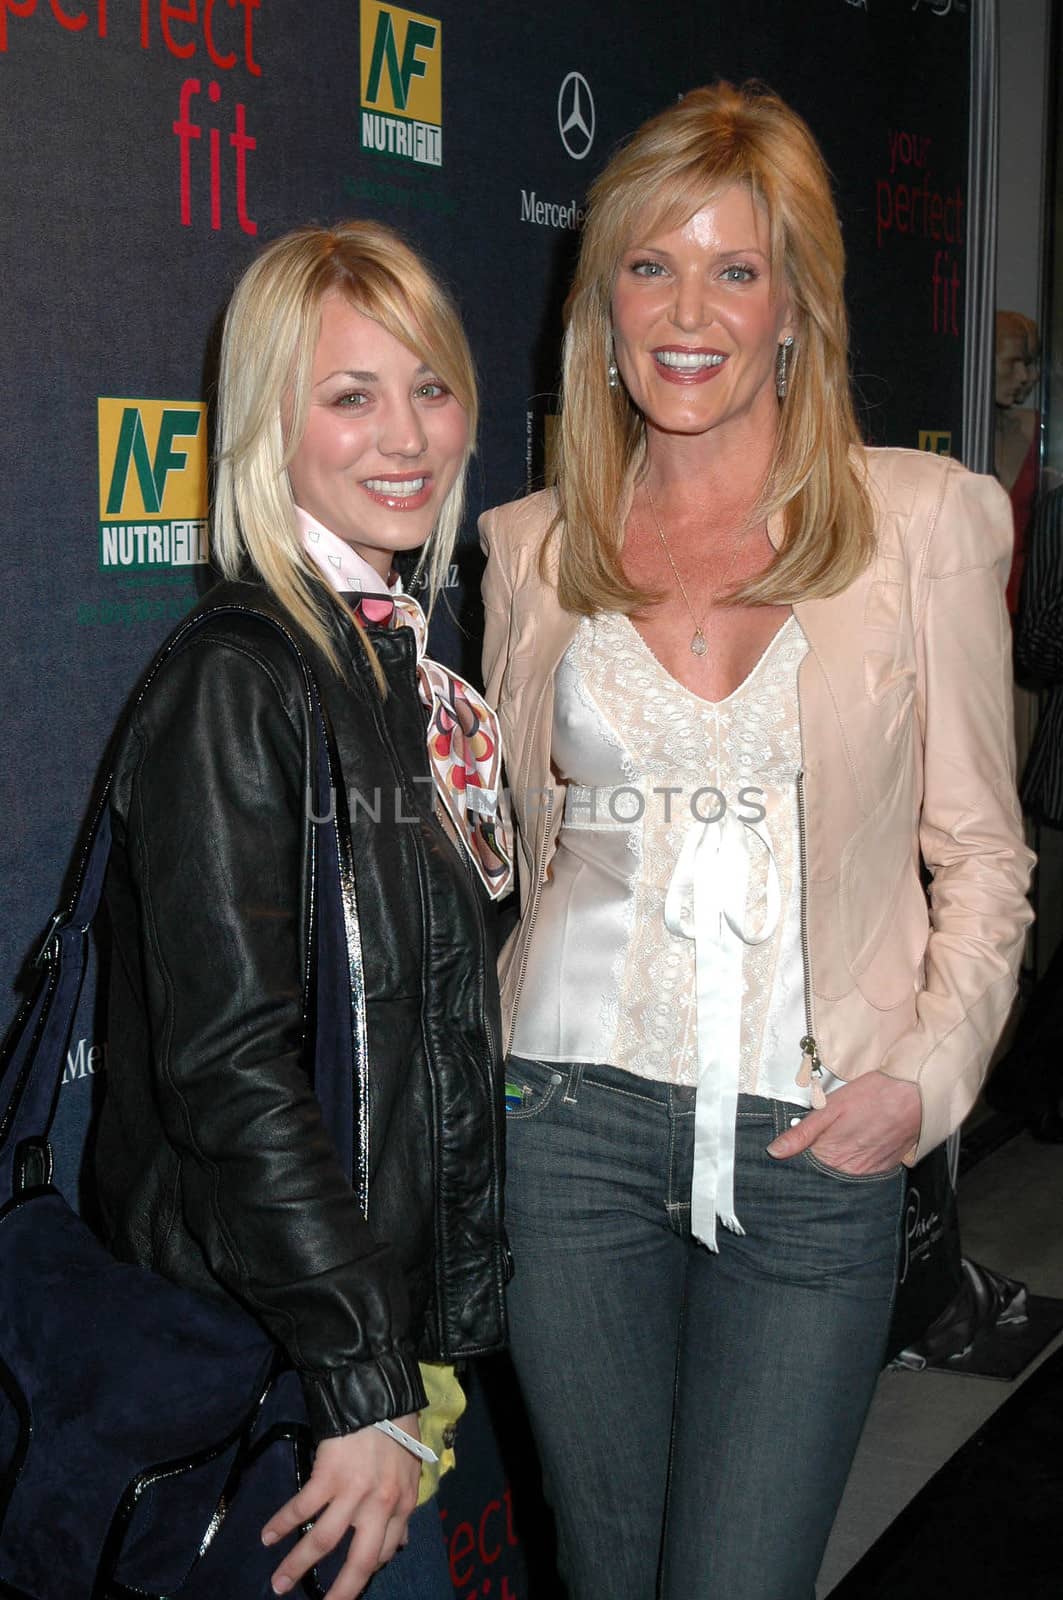 Kaley Cuoco and Paige Adams-Geller
/ImageCollect by ImageCollect